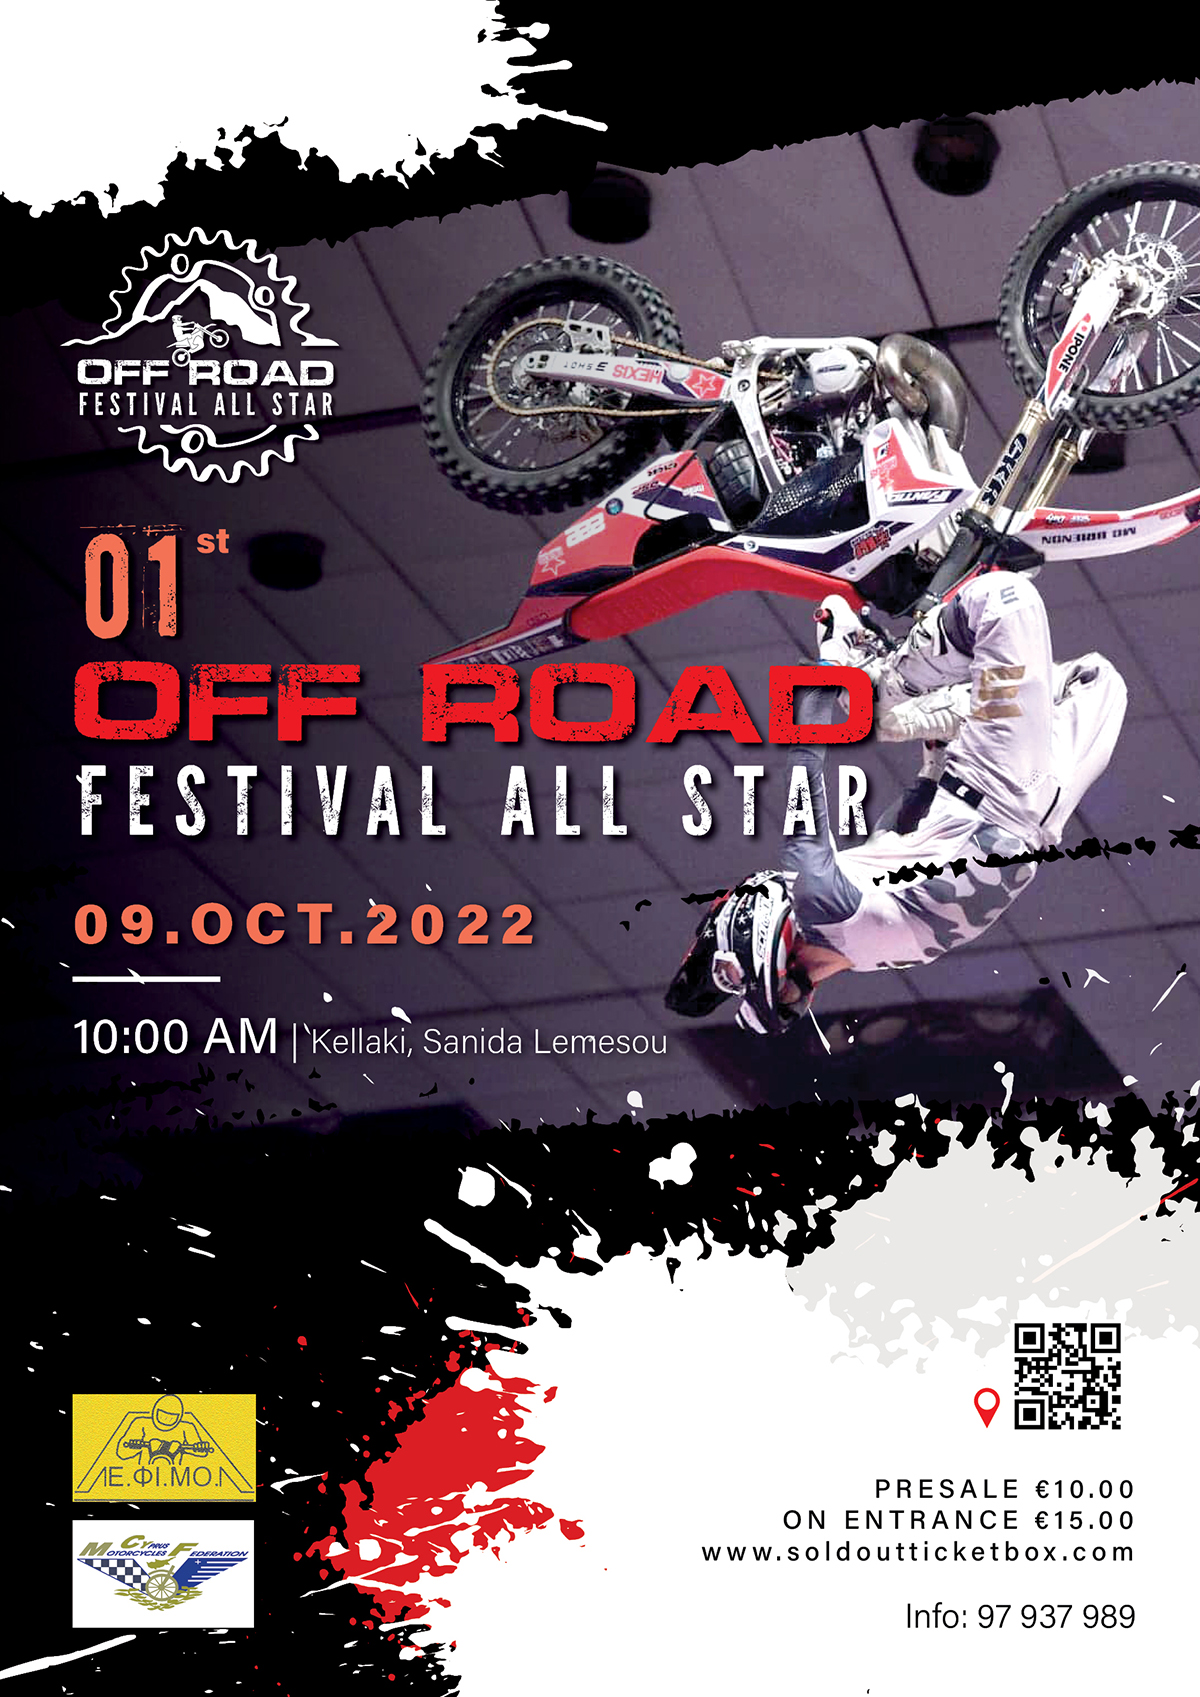 1st OFFROAD FESTIVAL ALL STAR